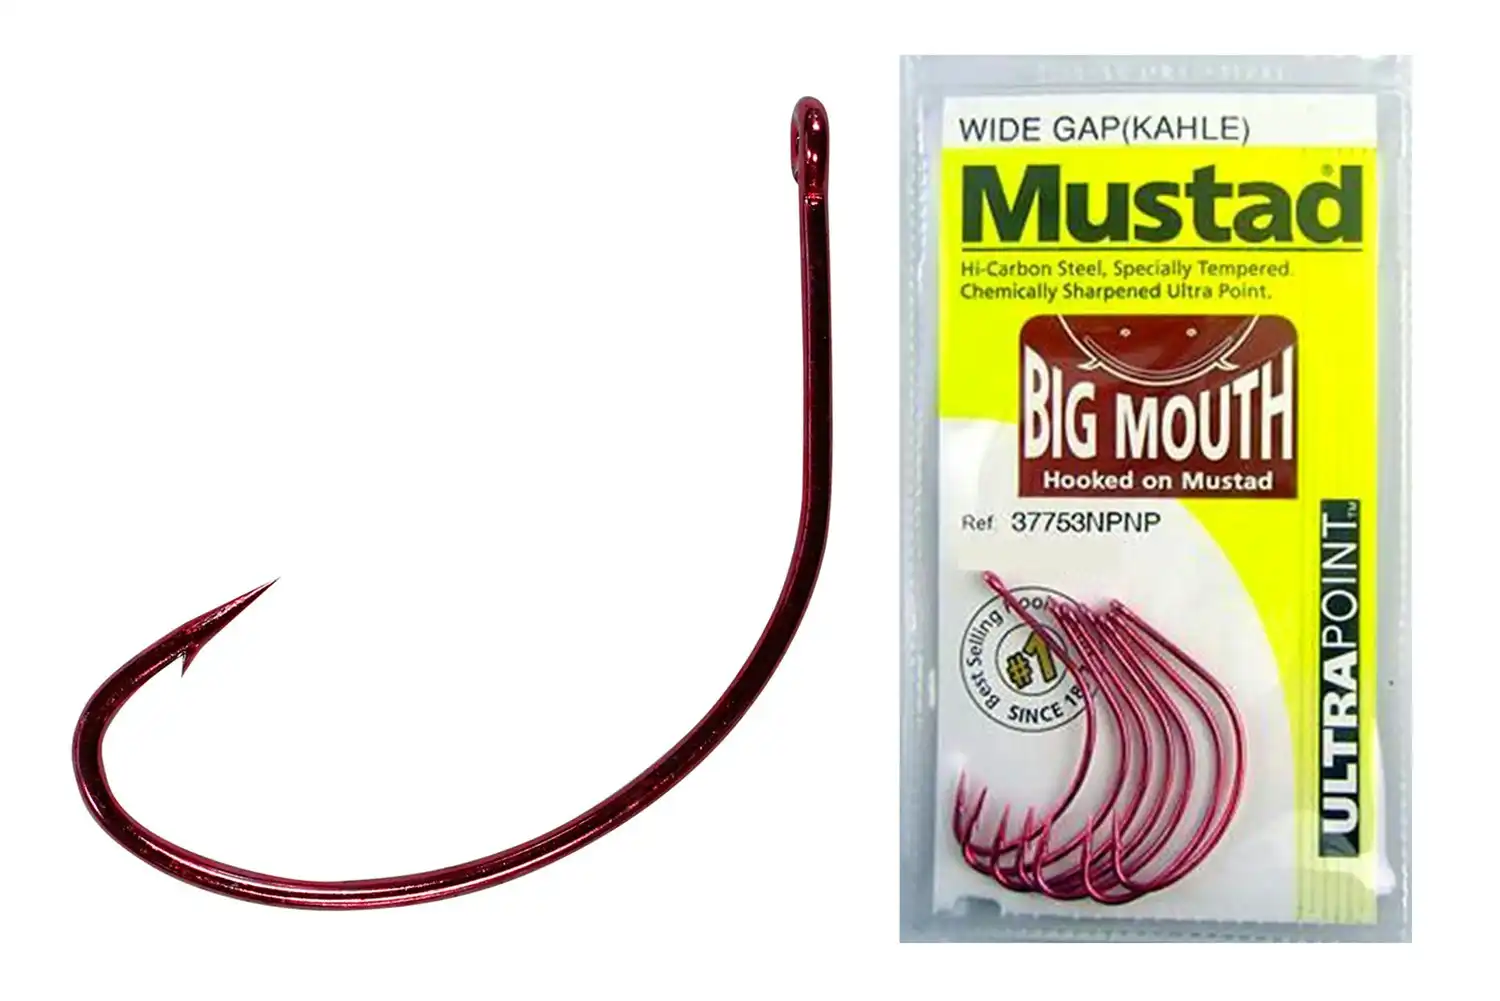 1 Packet of Mustad 37753NPNP Big Mouth Chemically Sharp Fishing